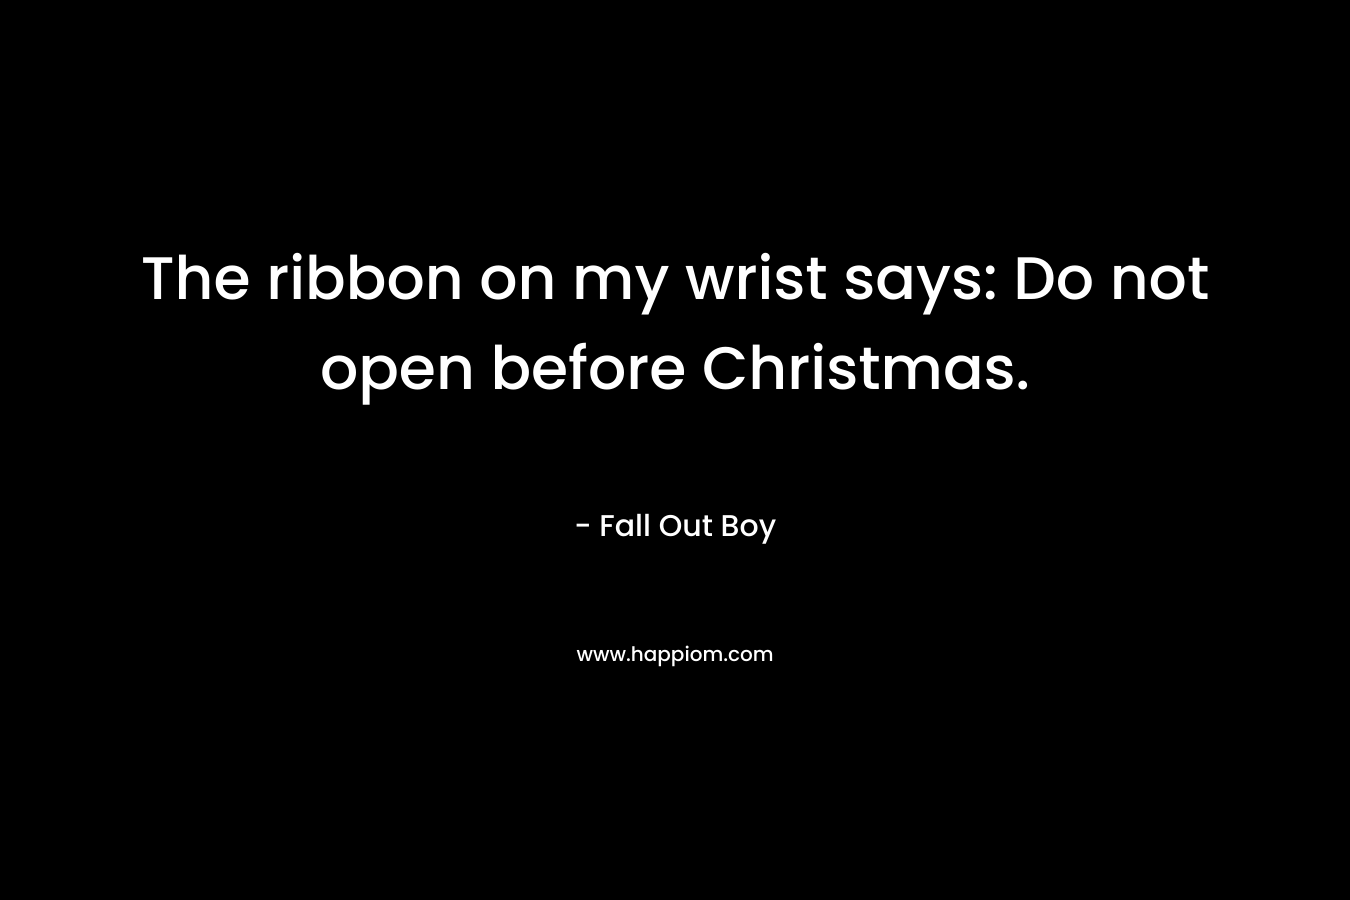 The ribbon on my wrist says: Do not open before Christmas. – Fall Out Boy